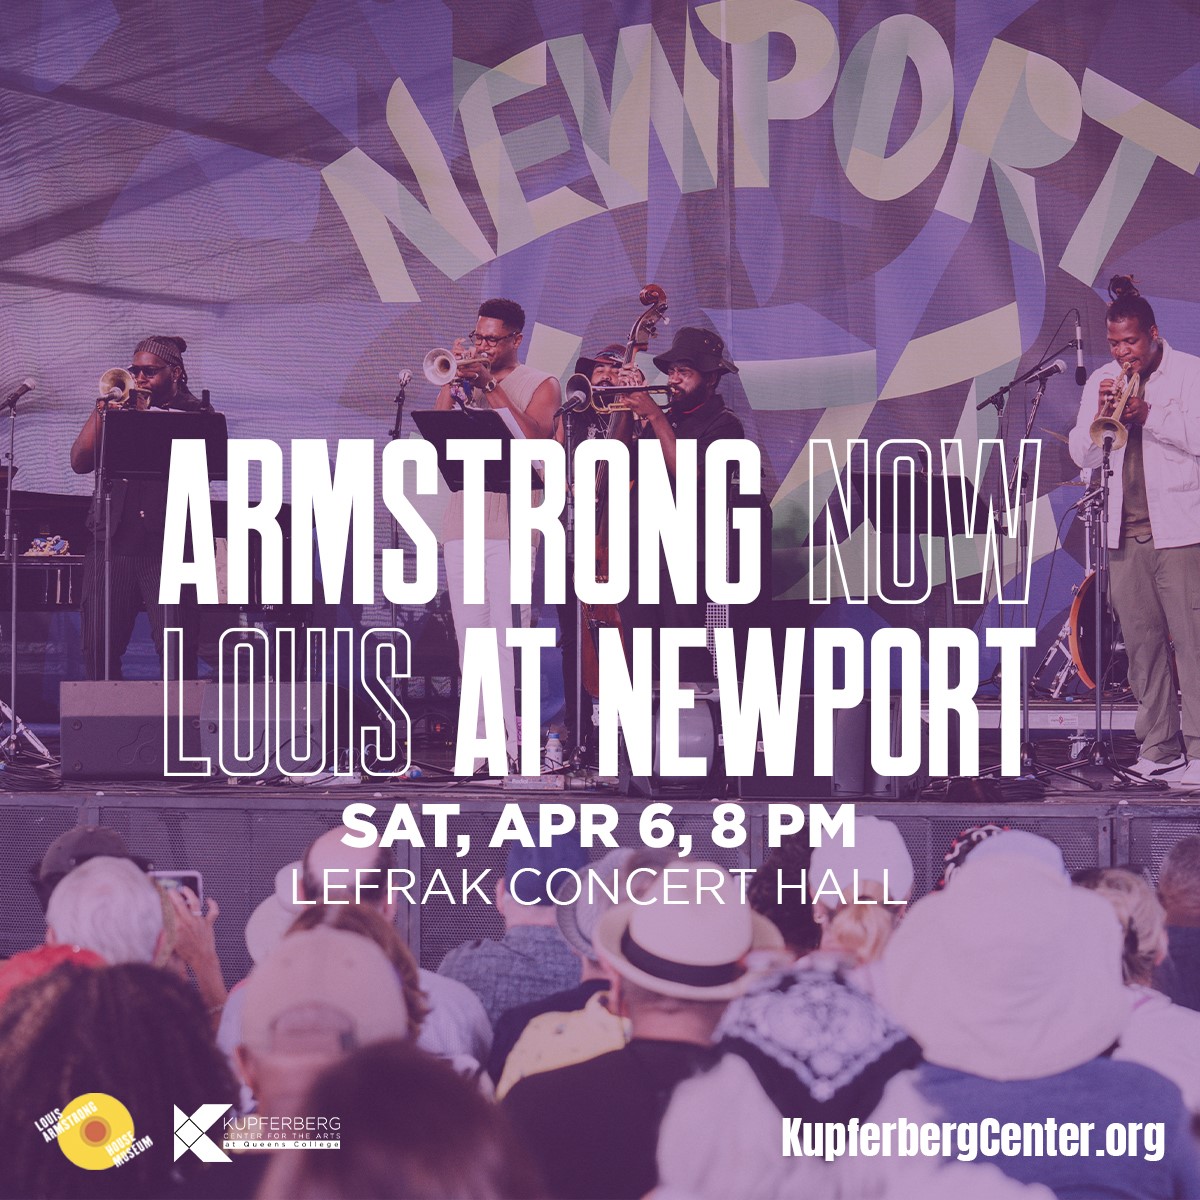 Armstrong Now: Louis at Newport 4/6, 8 pm LeFrak Concert Hall Tix: ow.ly/fQOR50R1FSY This generation’s leading trumpeters explore the Armstrong Archives through a contemporary lens. Presented in partnership with @ArmstrongHouse.